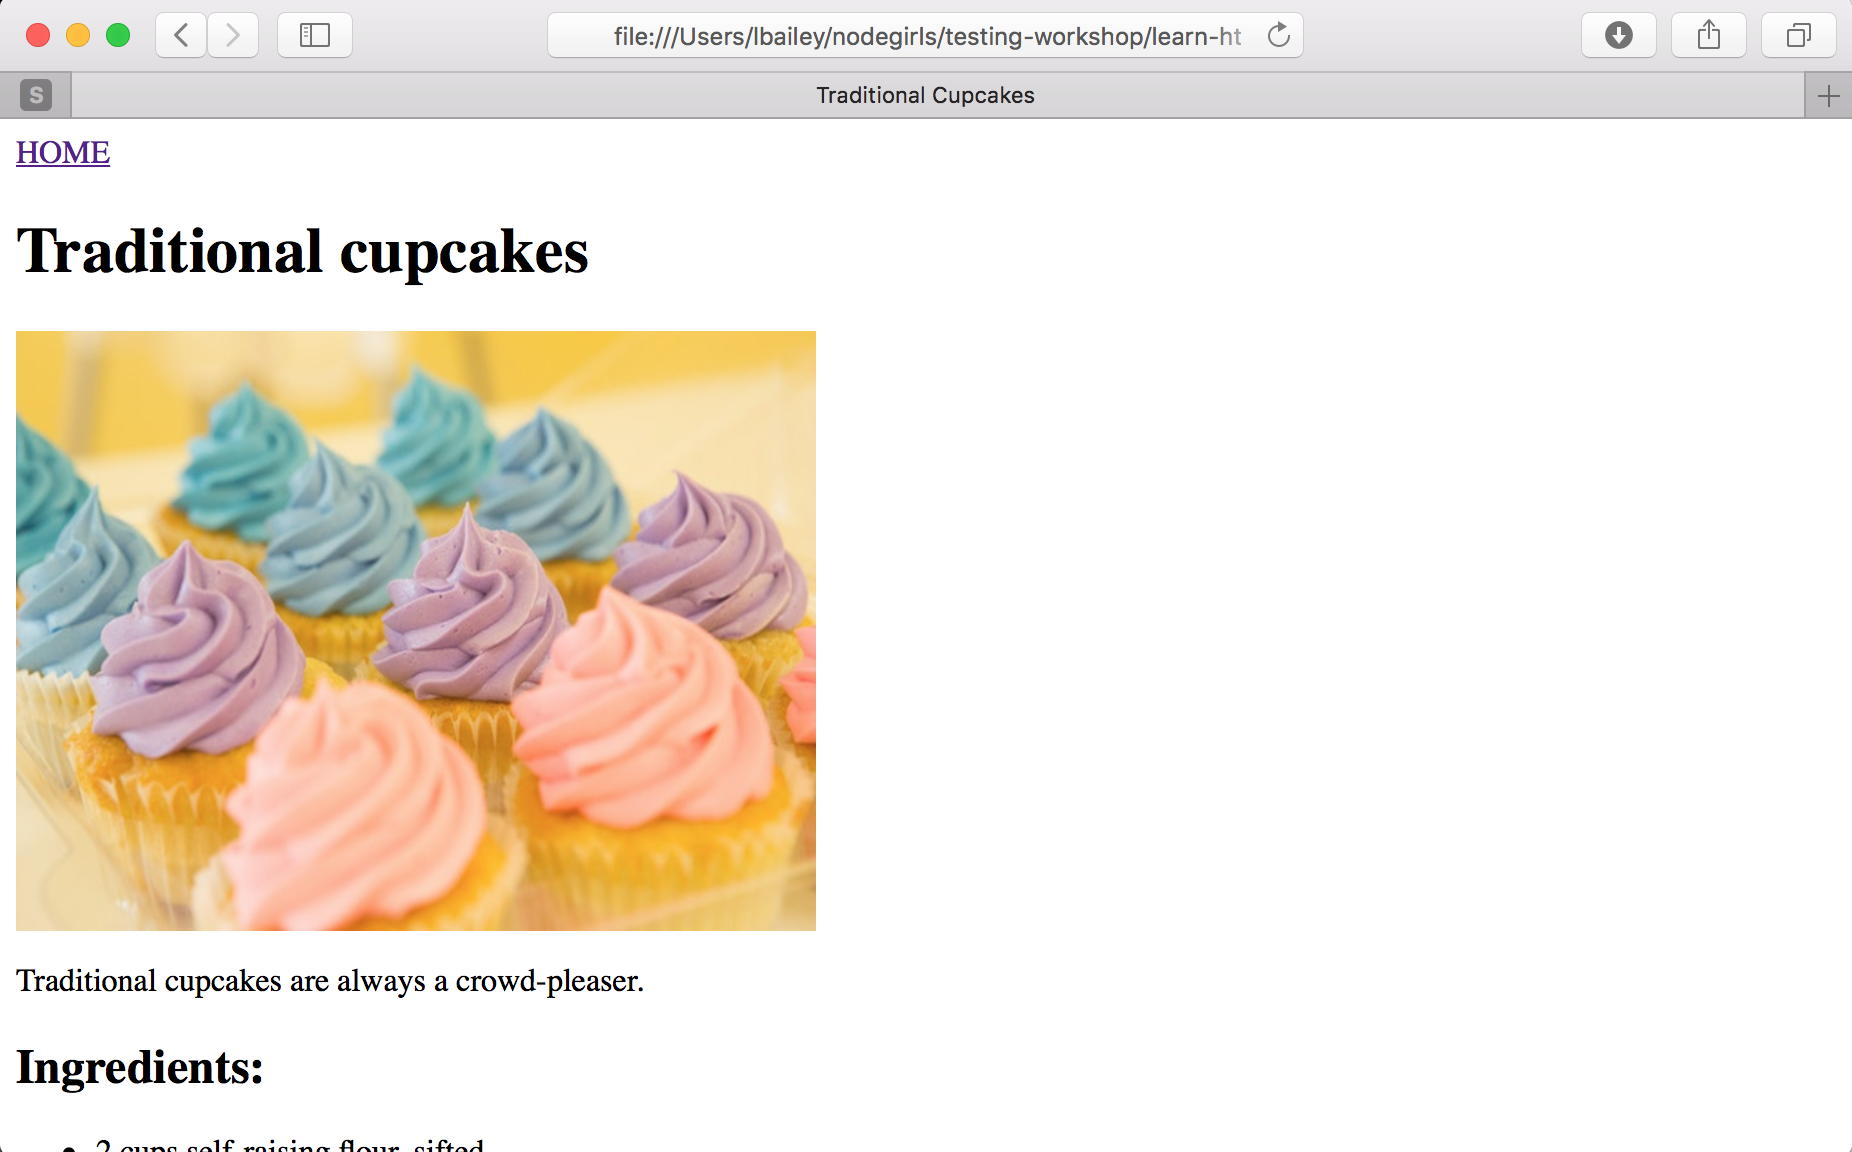 The cupcakes page with an image